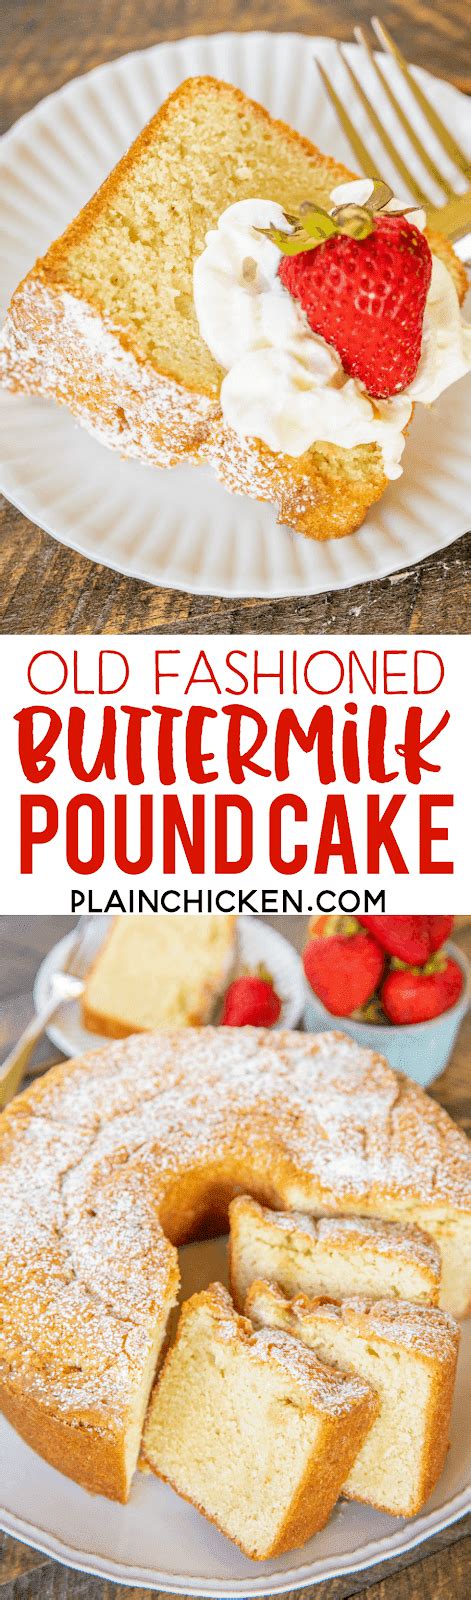 We are in love with this kentucky butter cake recipe from 5 boys baker! Old Fashioned Buttermilk Pound Cake | Plain Chicken®